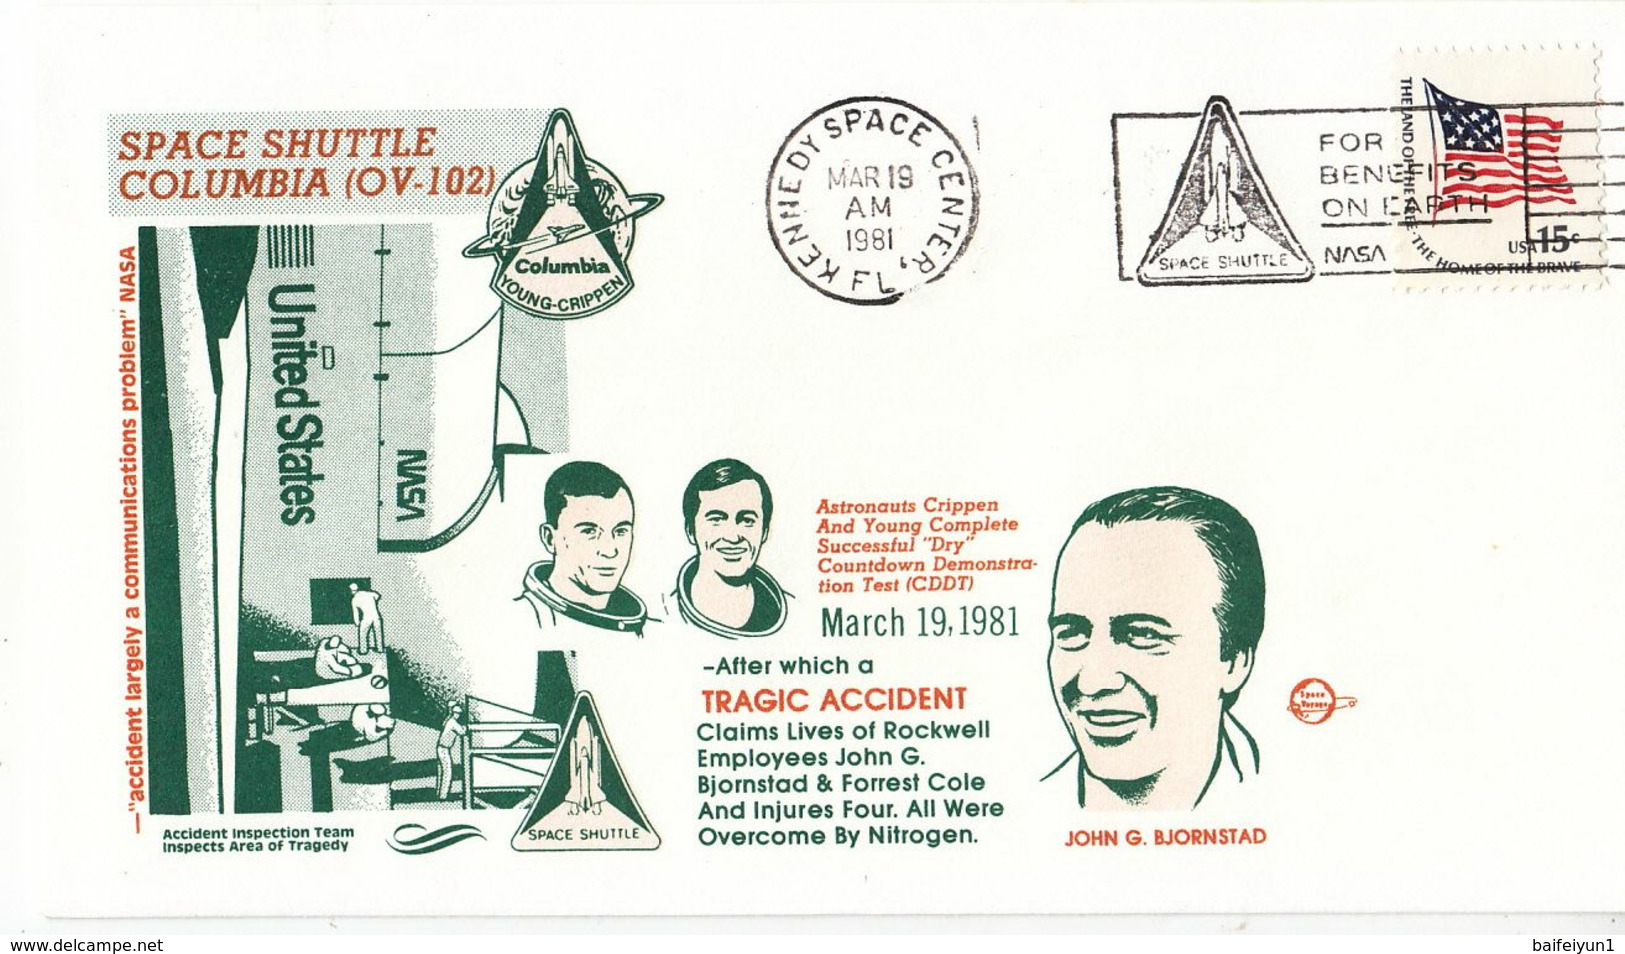 USA 1981 Space Shuttle Astronaunts Successful "Dry" Counterdown Demonstration Test Commemorative Cover - North  America